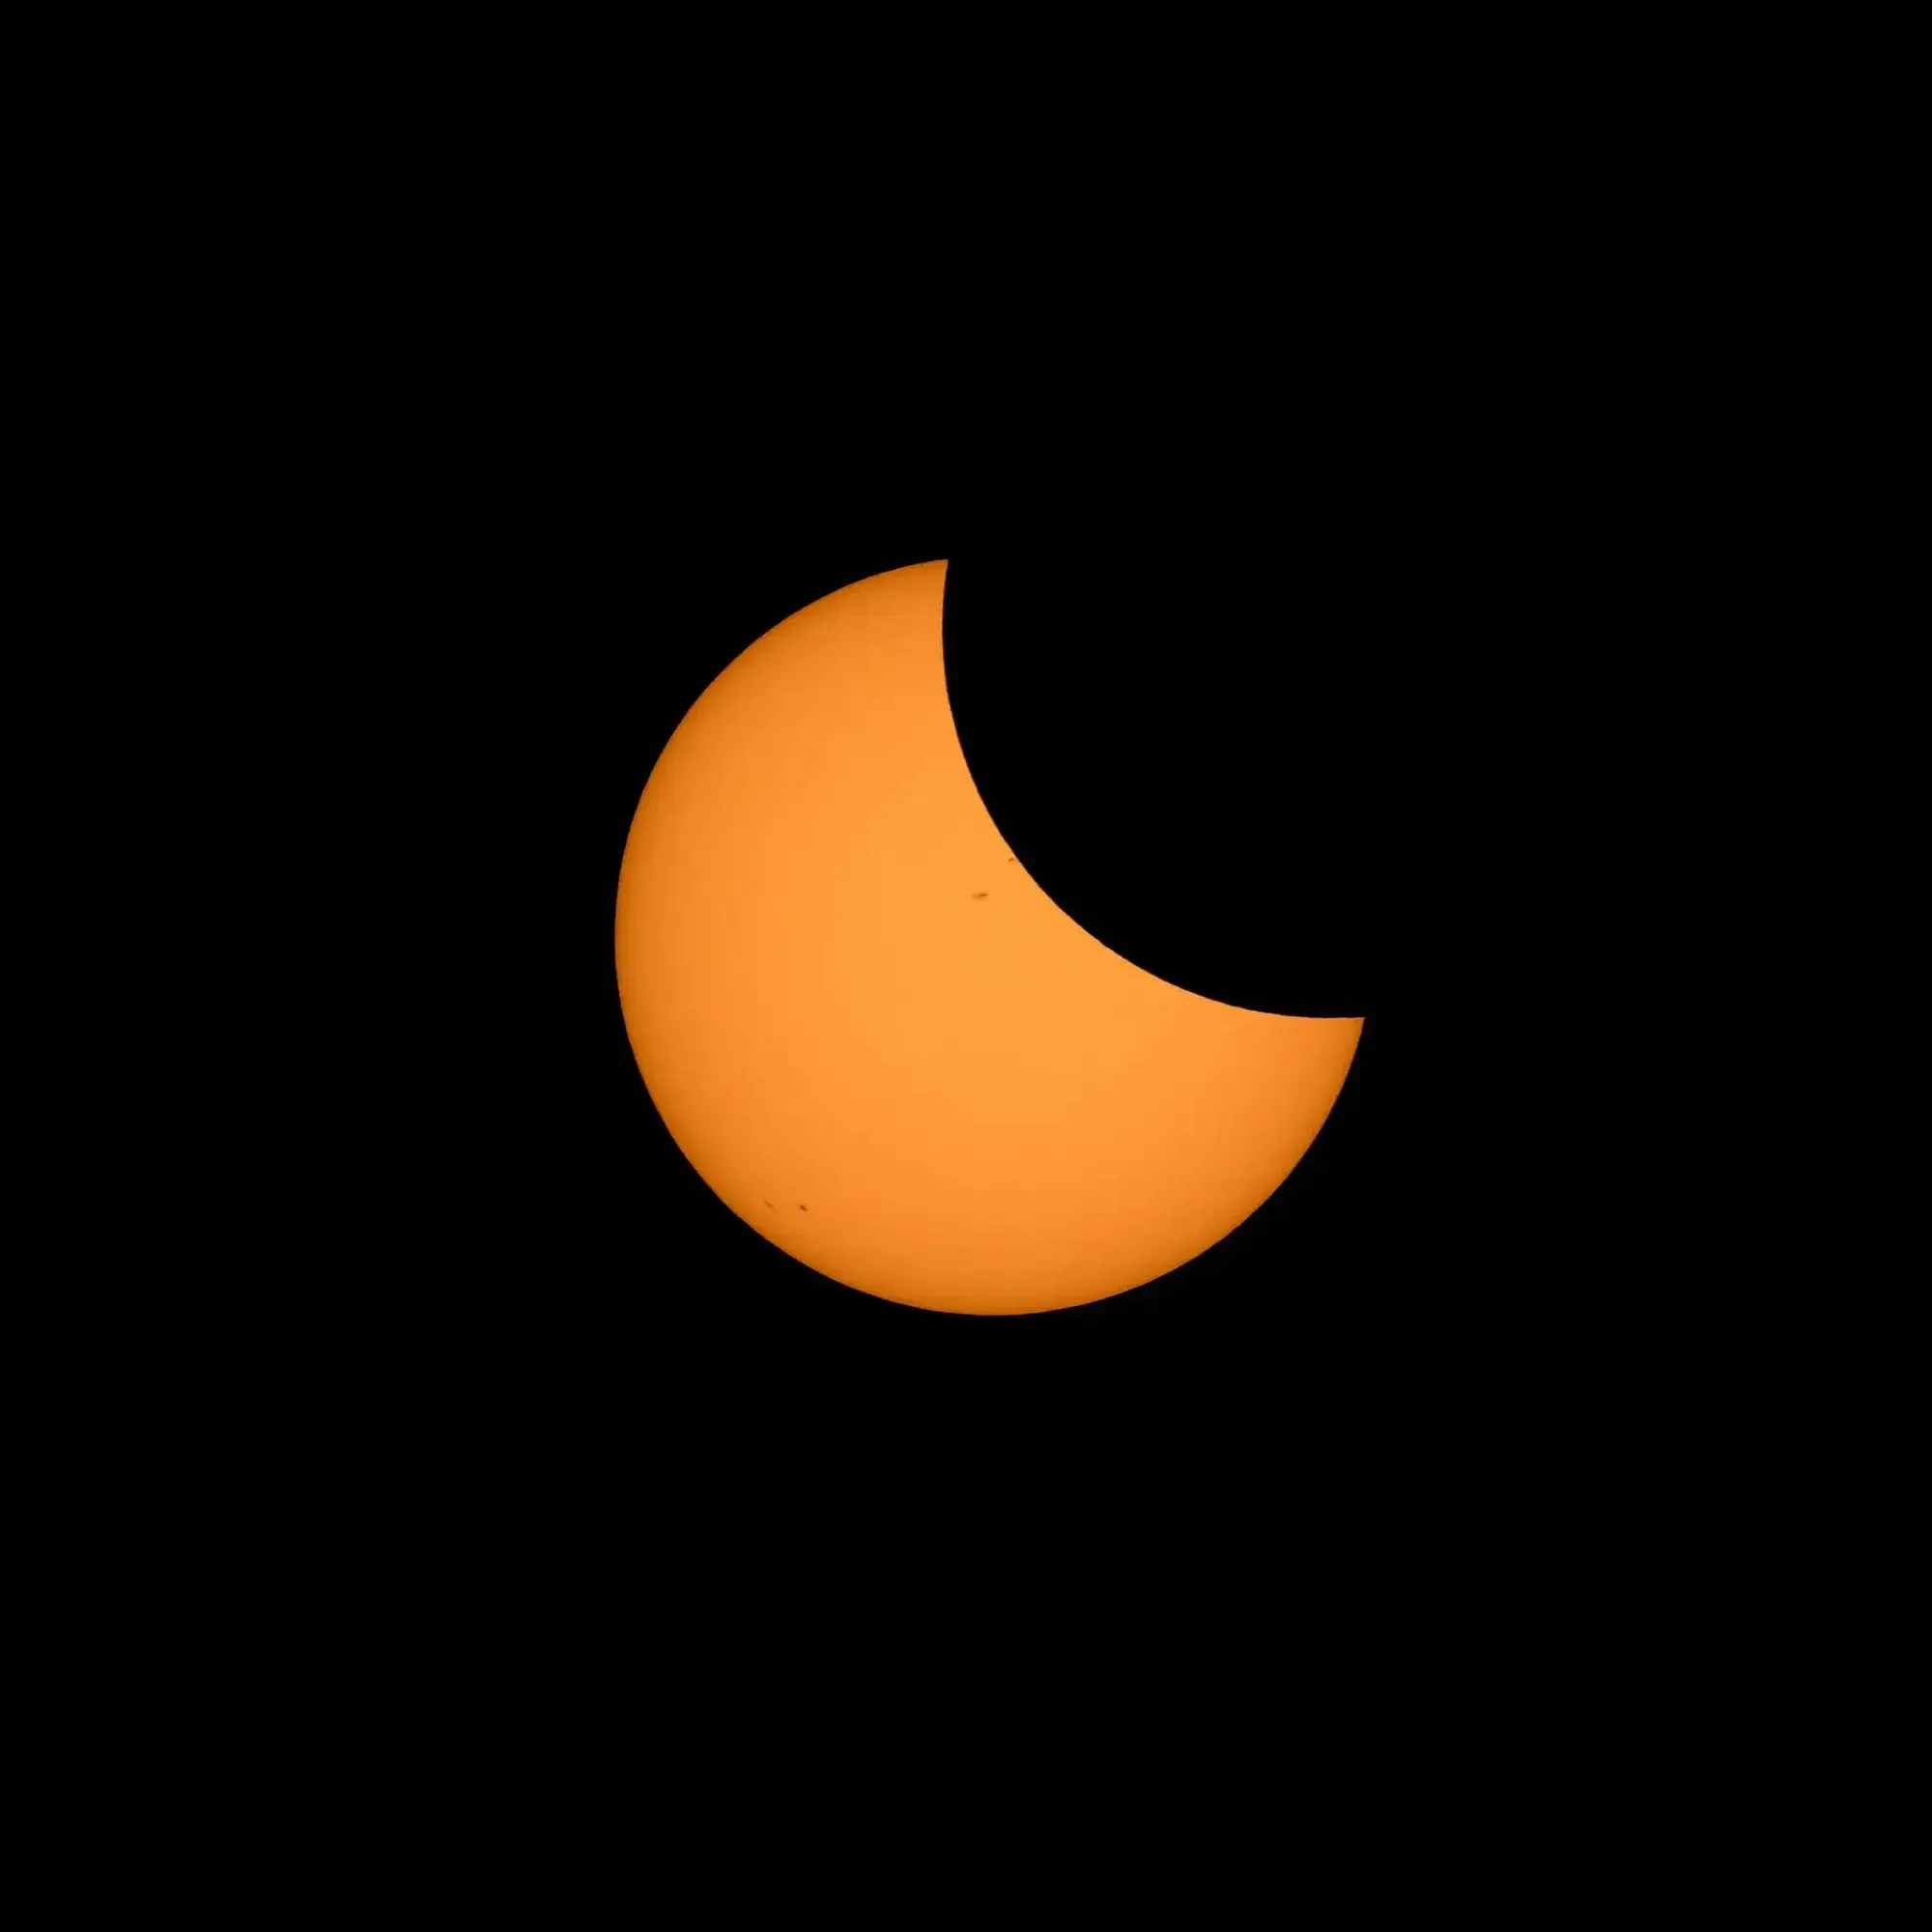 The Sun against a black background. The top right area appears to be scooped out where it is blocked by the Moon, like a crescent.